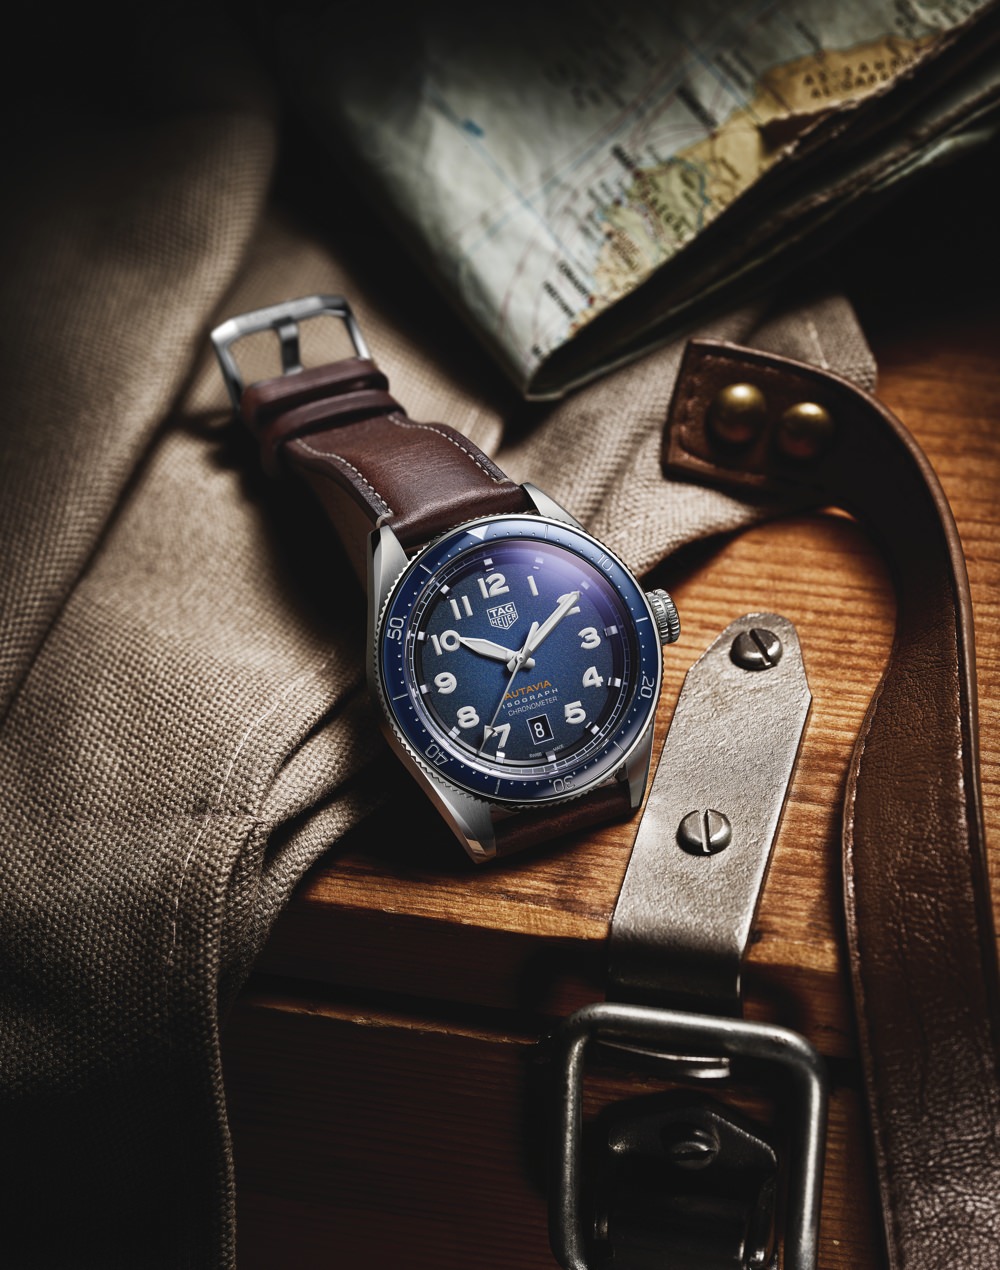 Moern heirloom timepieces from TAG Heuer for Father's Day